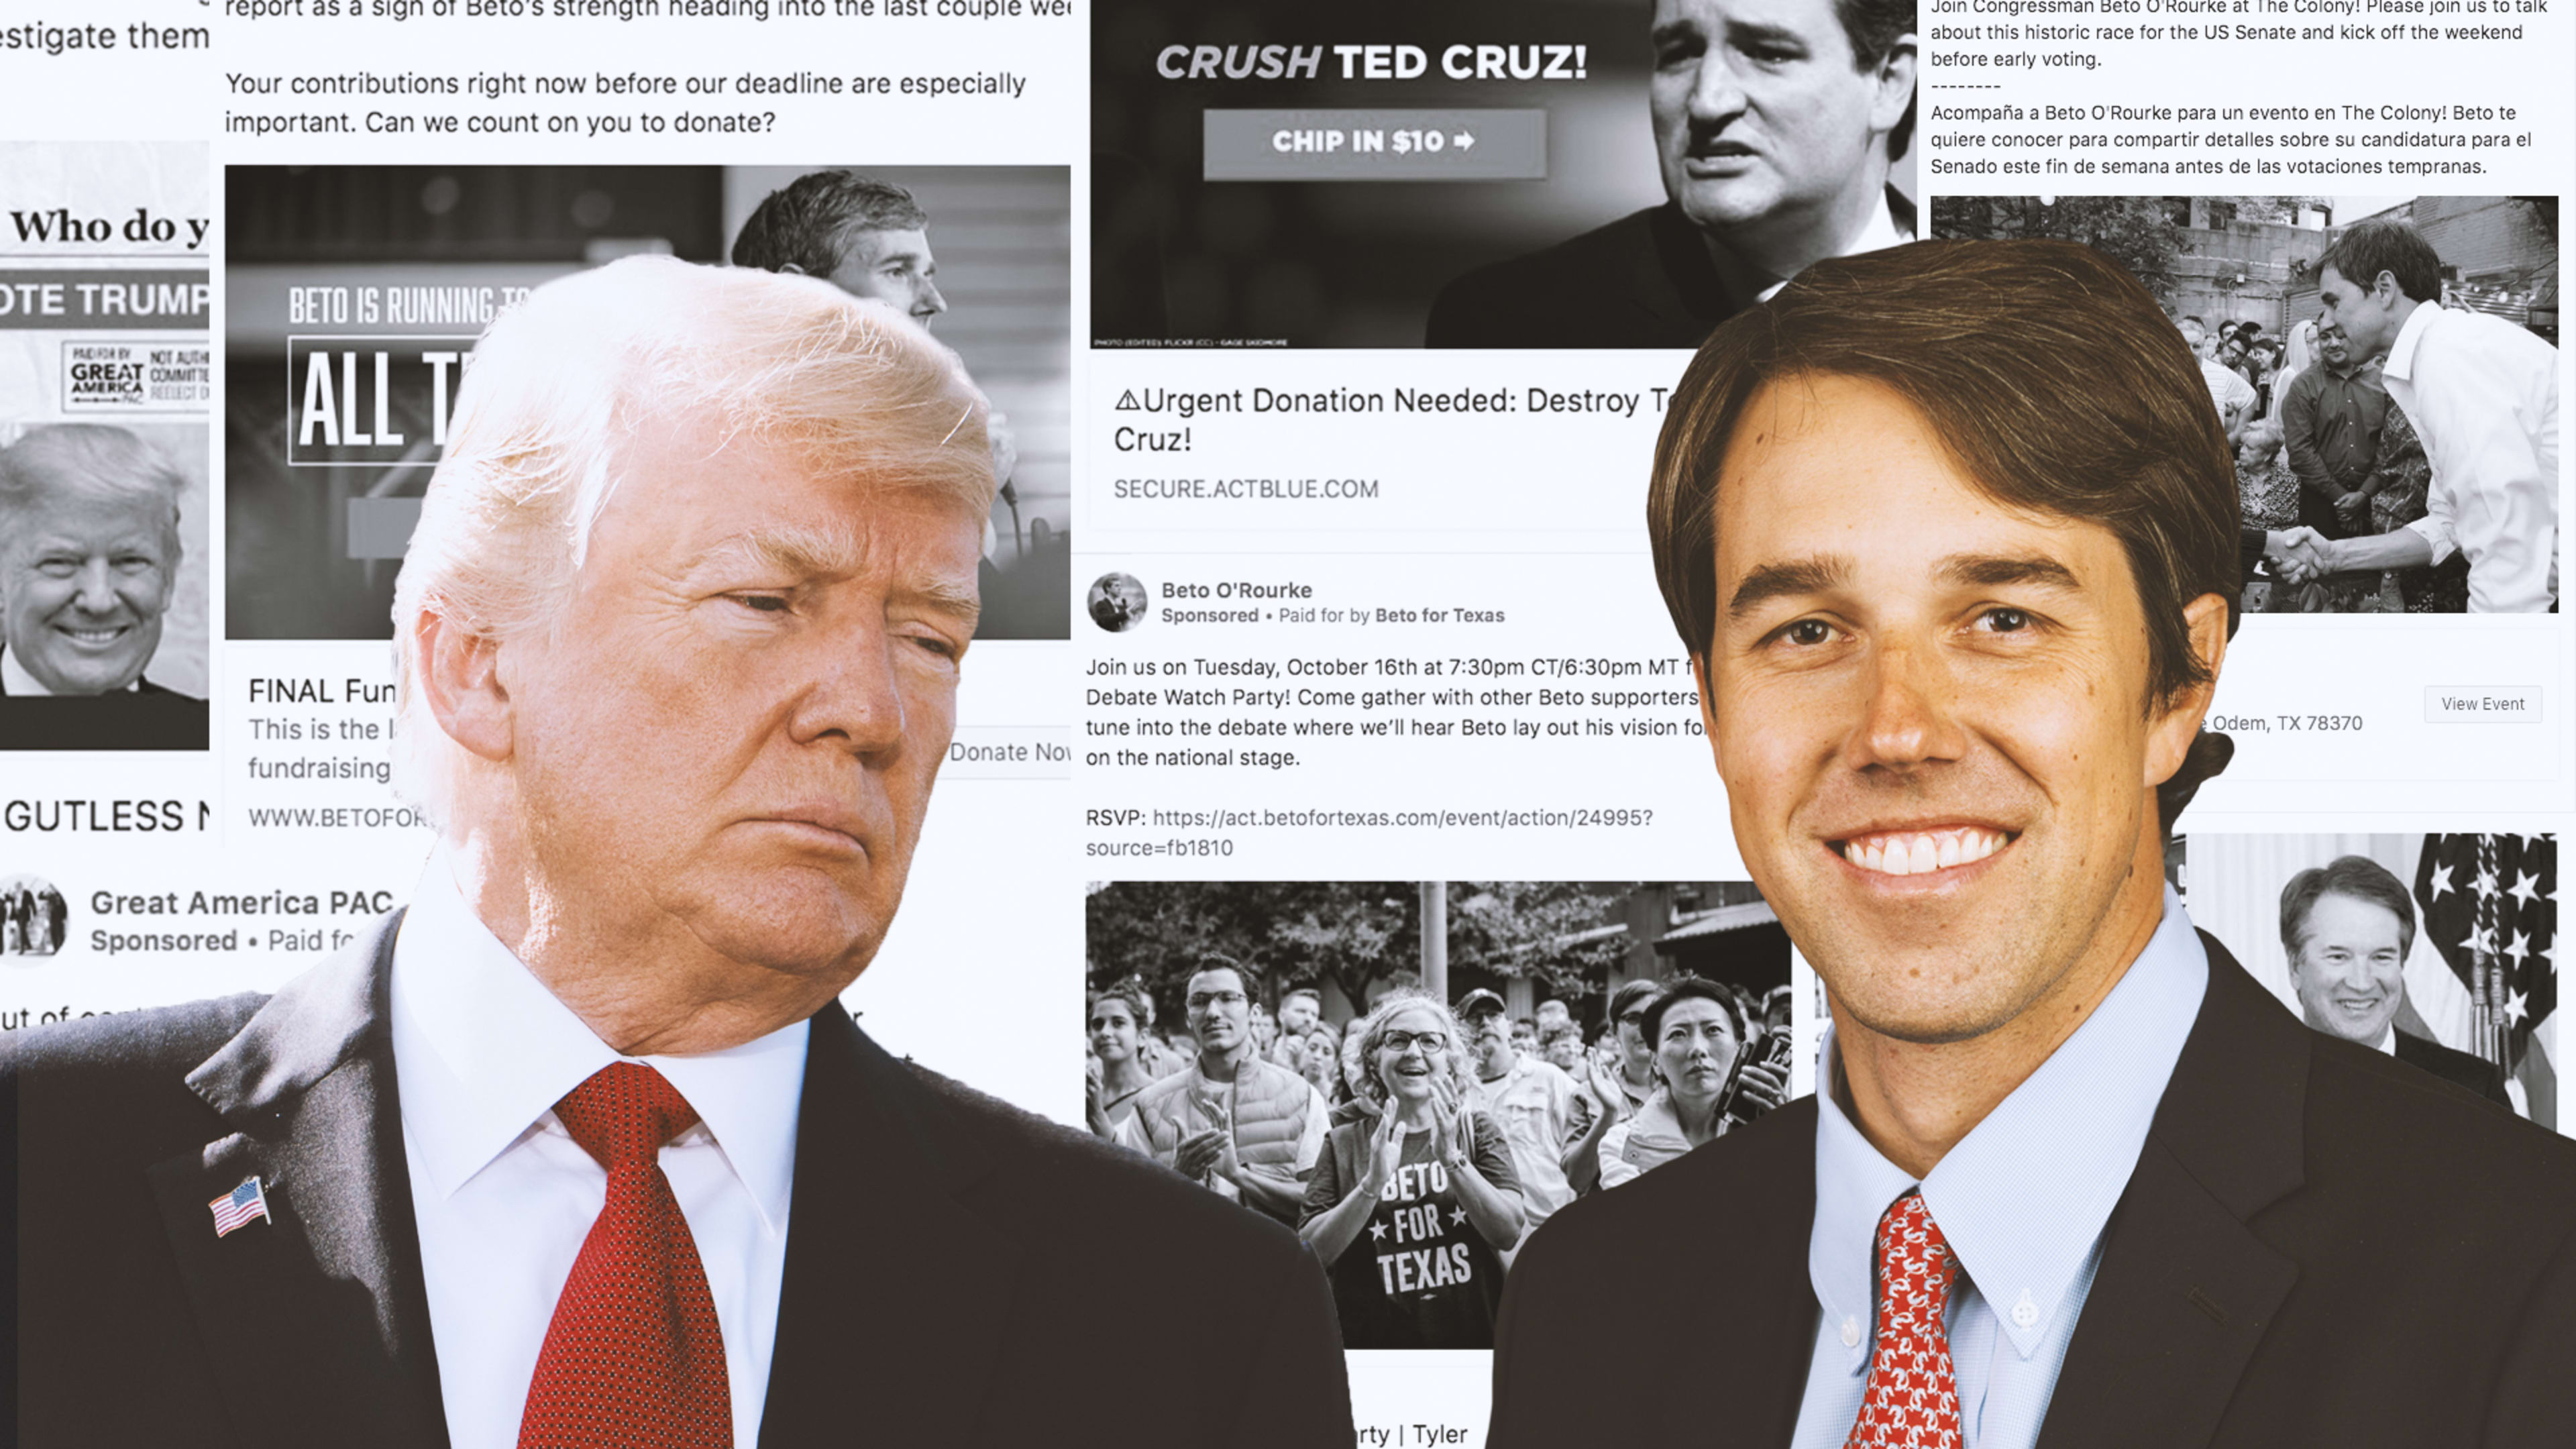 How Trump, O’Rourke, and the GOP lead the online political advertising race